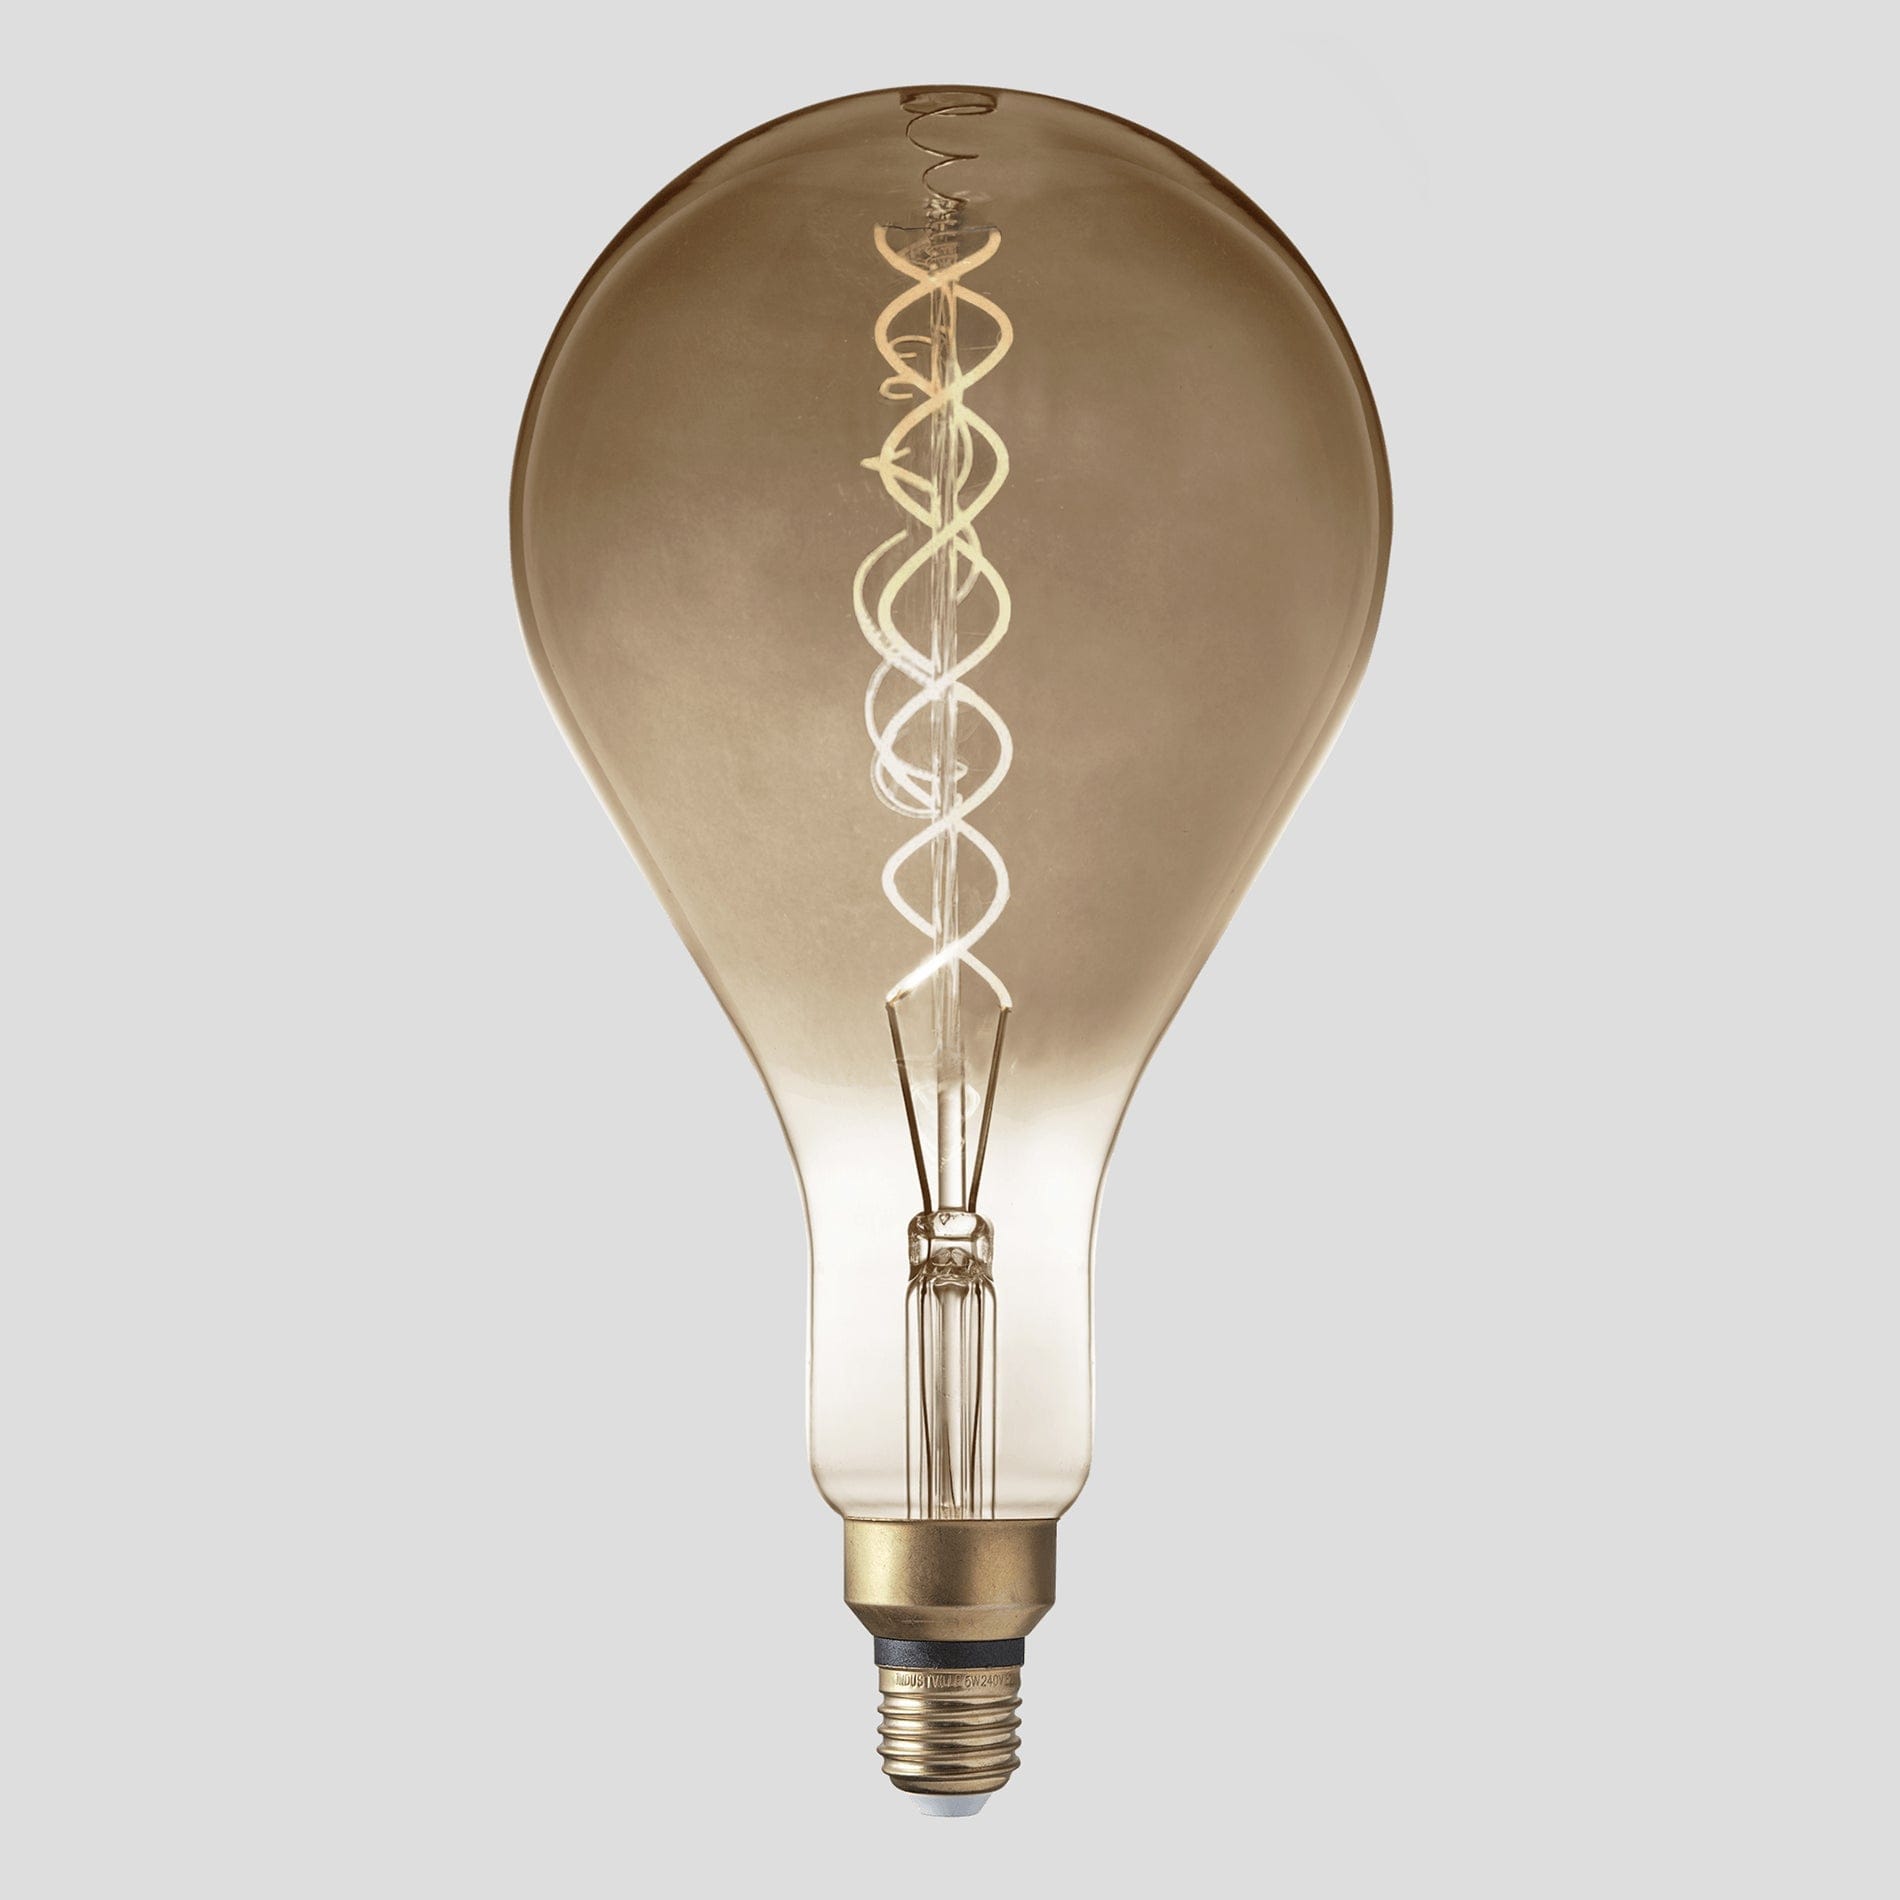 Vintage Giant LED Edison Bulb Old Filament Lamp - 8W E27 Spiral Drop PS160 - Smoke Grey Industville PS160-8W-SG